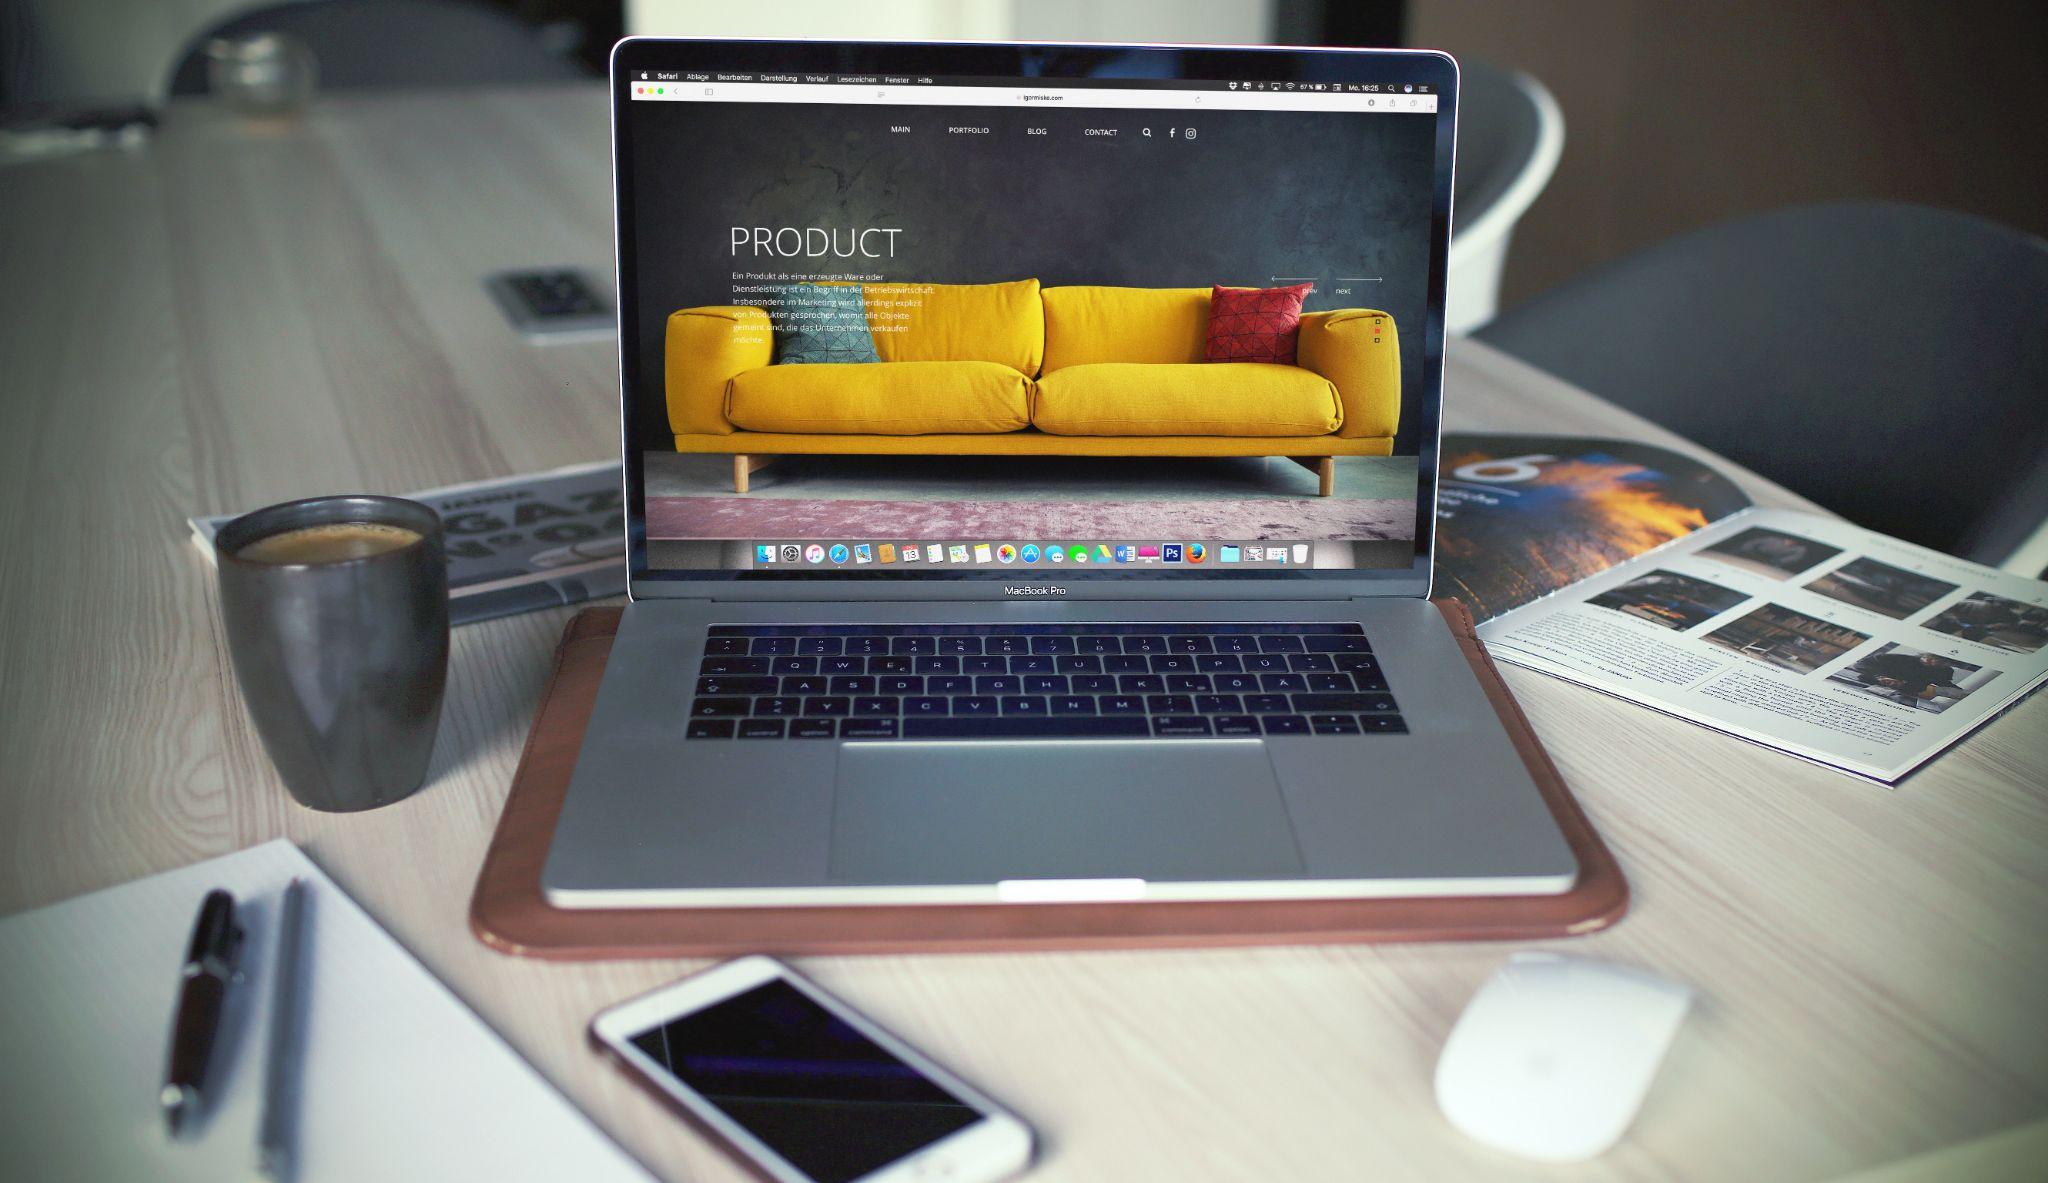 Yellow Couch With Product Text on Laptop